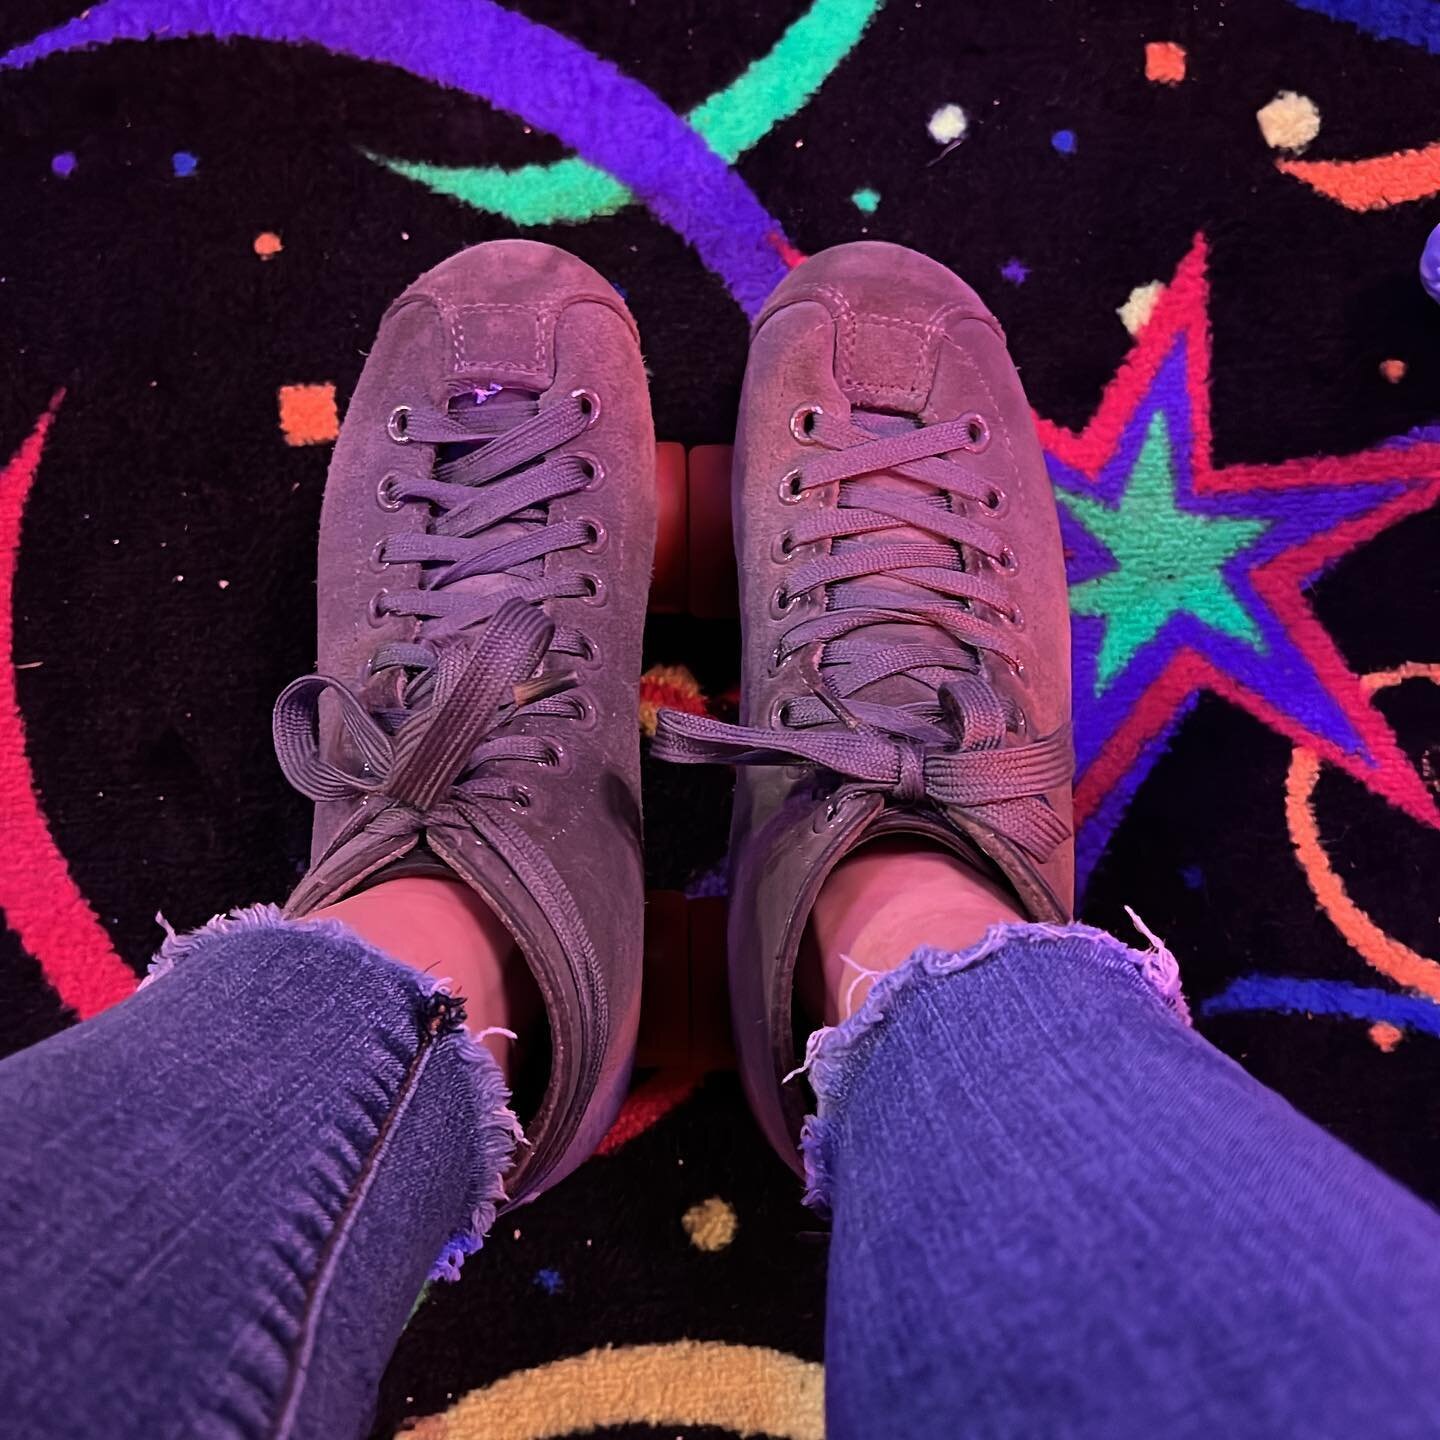 Today&rsquo;s next adventure&hellip; roller skating! Pray for me! 😅